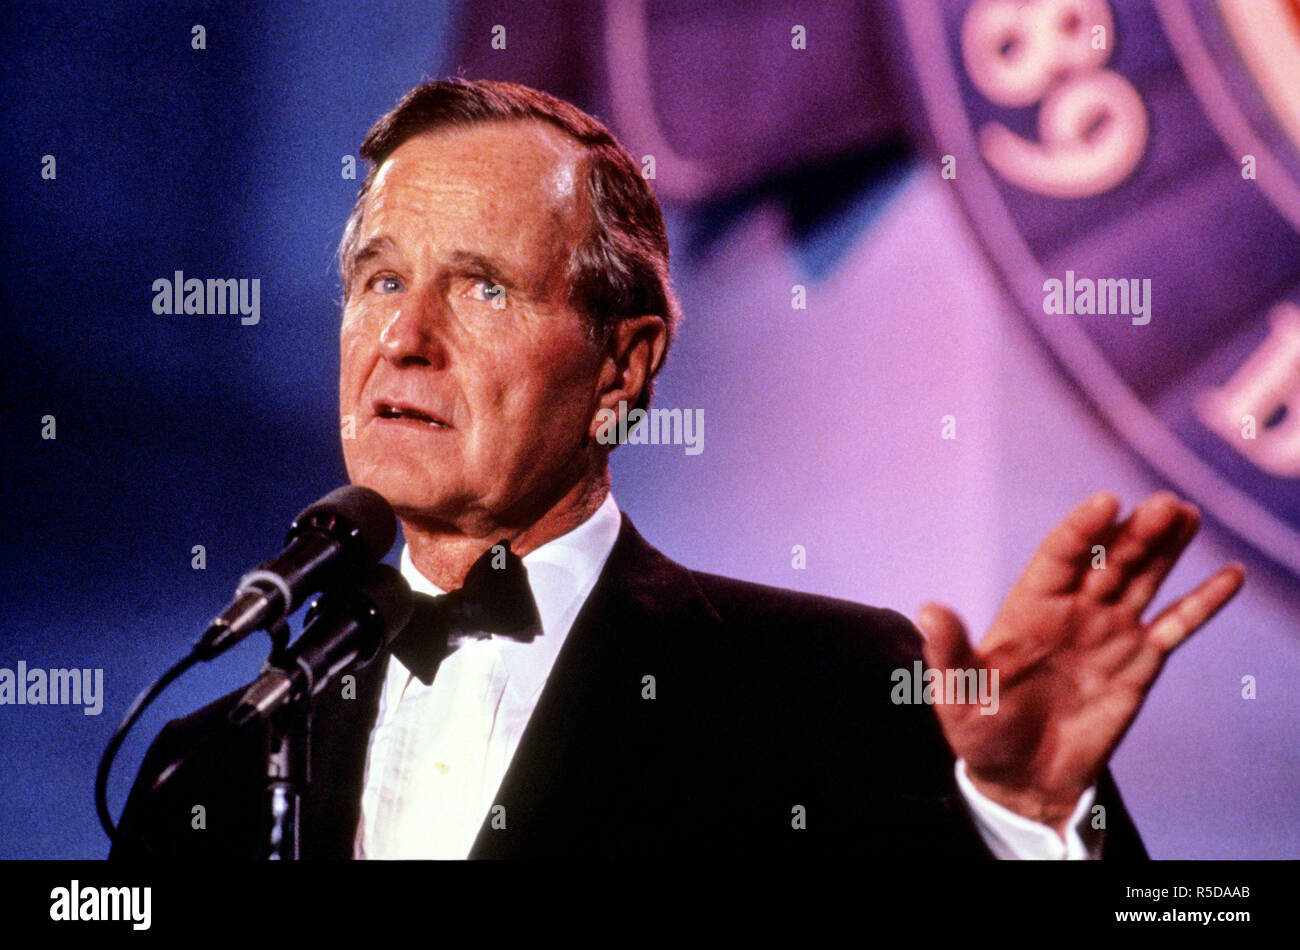 ***FILE PHOTO*** George H.W. Bush Has Passed Away United States President George H.W. Bush makes remarks at an Inaugural Ball on Inauguration Day, January 20, 1989 in Washington, DC. Credit: Pam Price/Pool via CNP /MediaPunch Credit: MediaPunch Inc/Alamy Live News Stock Photo